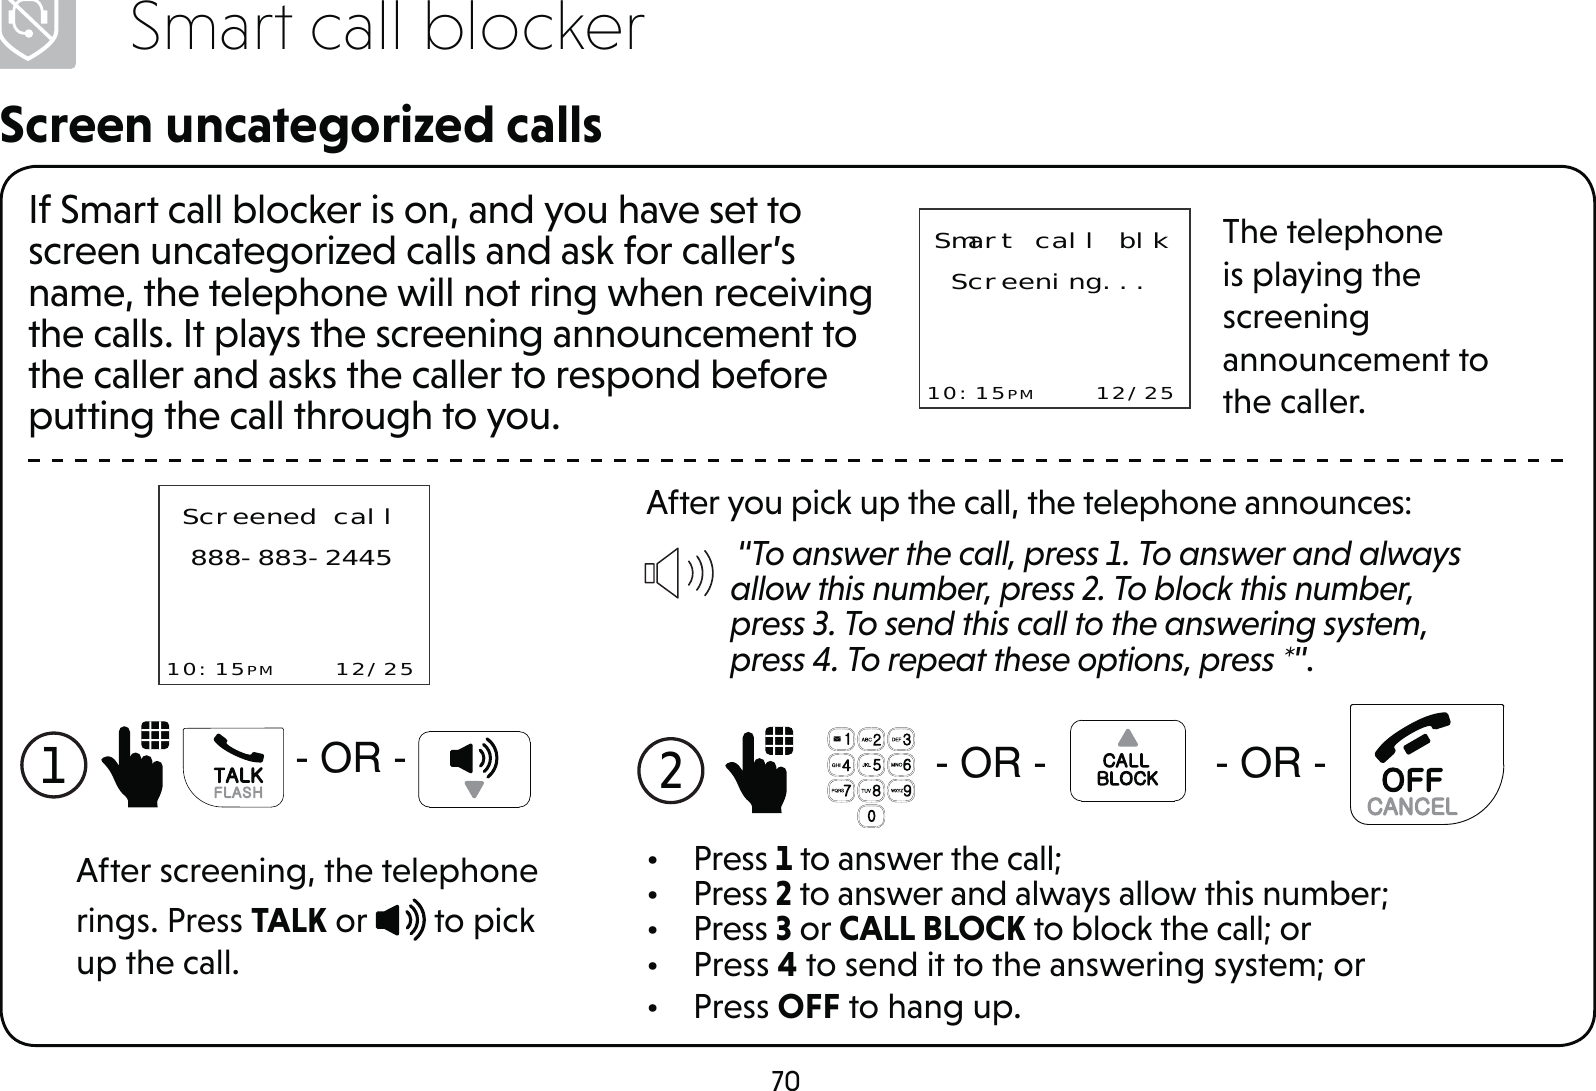 70Smart call blockerScreen uncategorized callsIf Smart call blocker is on, and you have set to screen uncategorized calls and ask for caller’s name, the telephone will not ring when receiving the calls. It plays the screening announcement to the caller and asks the caller to respond before putting the call through to you.Smart call blkScreening...10:15PM    12/25The telephone is playing the screening announcement to the caller.After you pick up the call, the telephone announces: “To answer the call, press 1. To answer and always allow this number, press 2. To block this number, press 3. To send this call to the answering system, press 4. To repeat these options, press *”.2  25 25• Press 1 to answer the call;• Press 2 to answer and always allow this number;• Press 3 or CALL BLOCK to block the call; or• Press 4 to send it to the answering system; or• Press OFF to hang up.Screened call888-883-244510:15PM    12/25After screening, the telephone rings. Press TALK or   to pick up the call.1 25